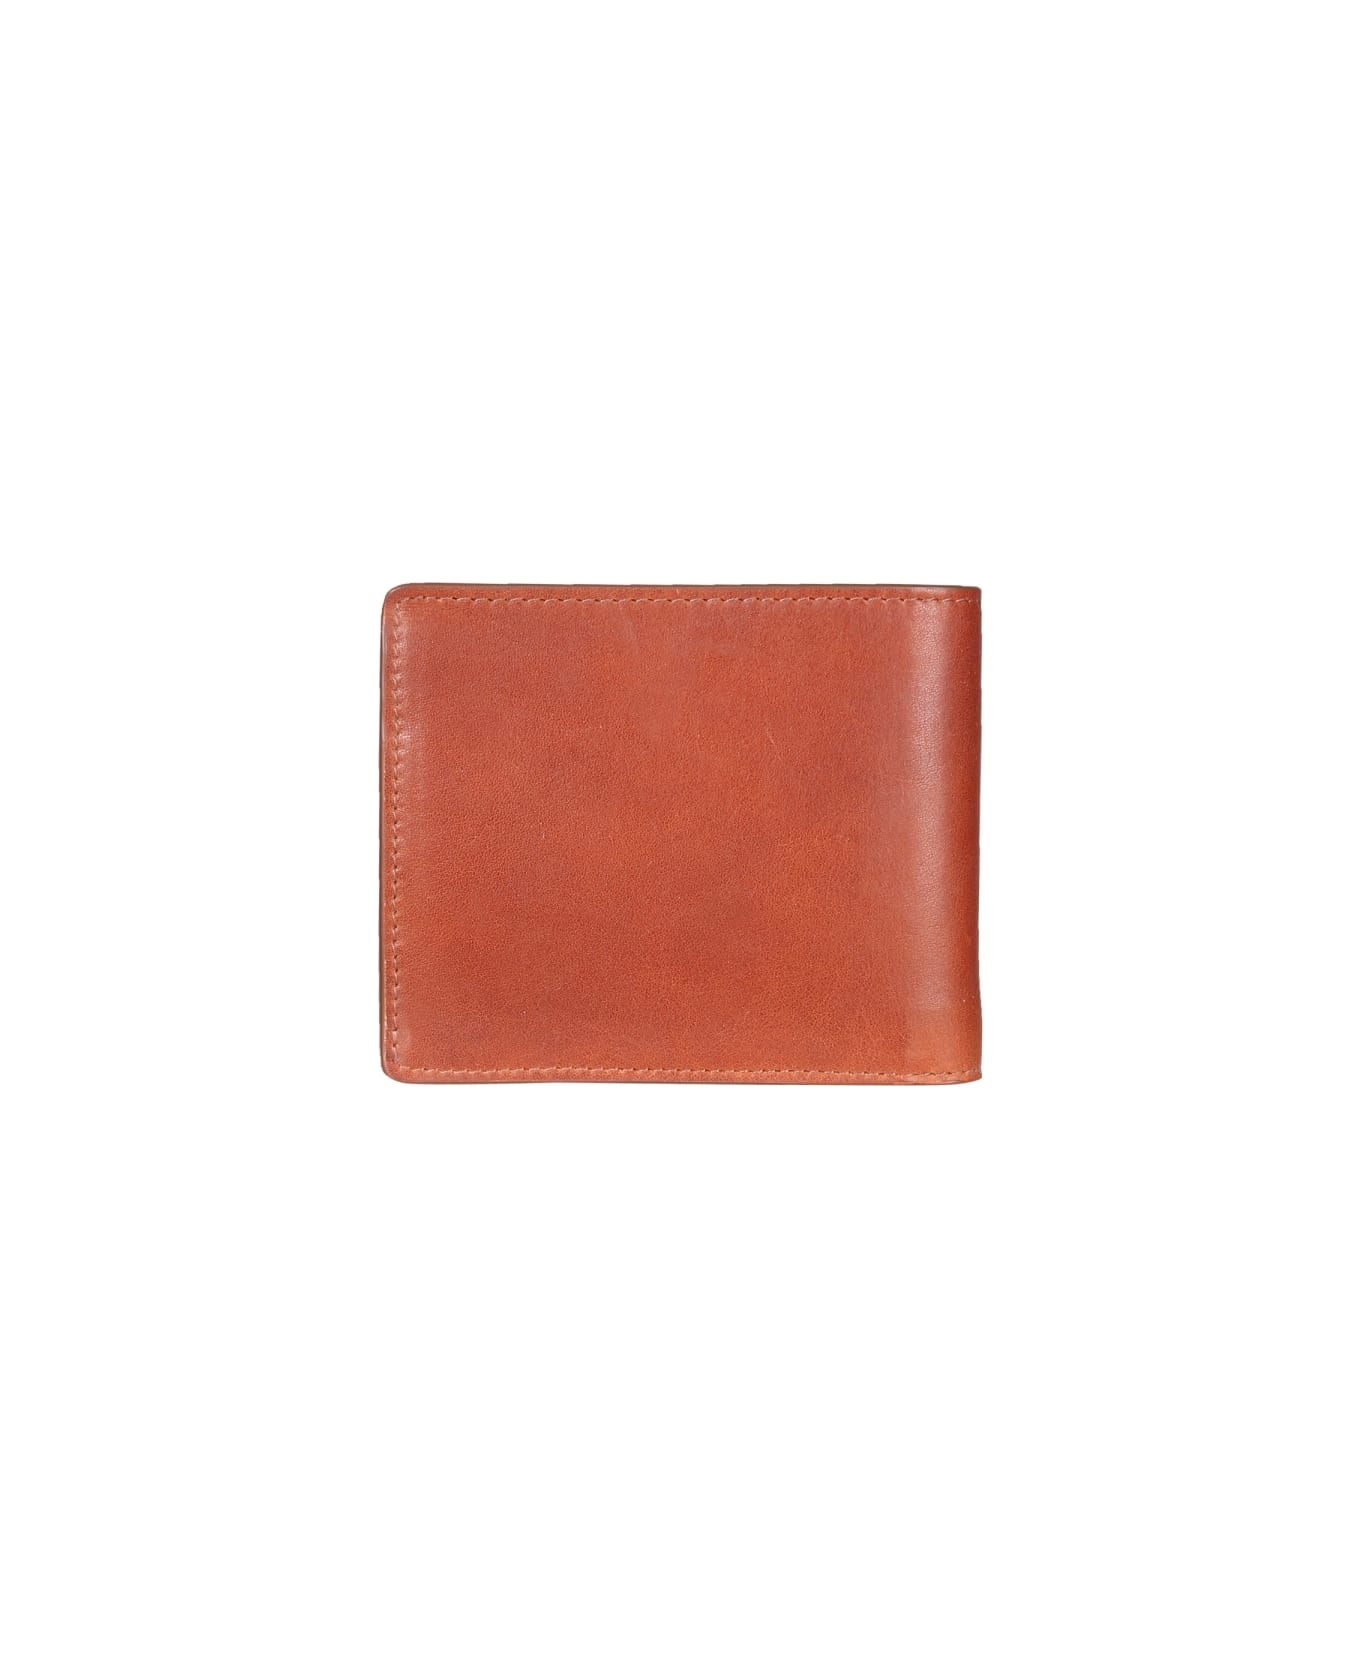 Il Bisonte Leather Bifold Wallet - BROWN